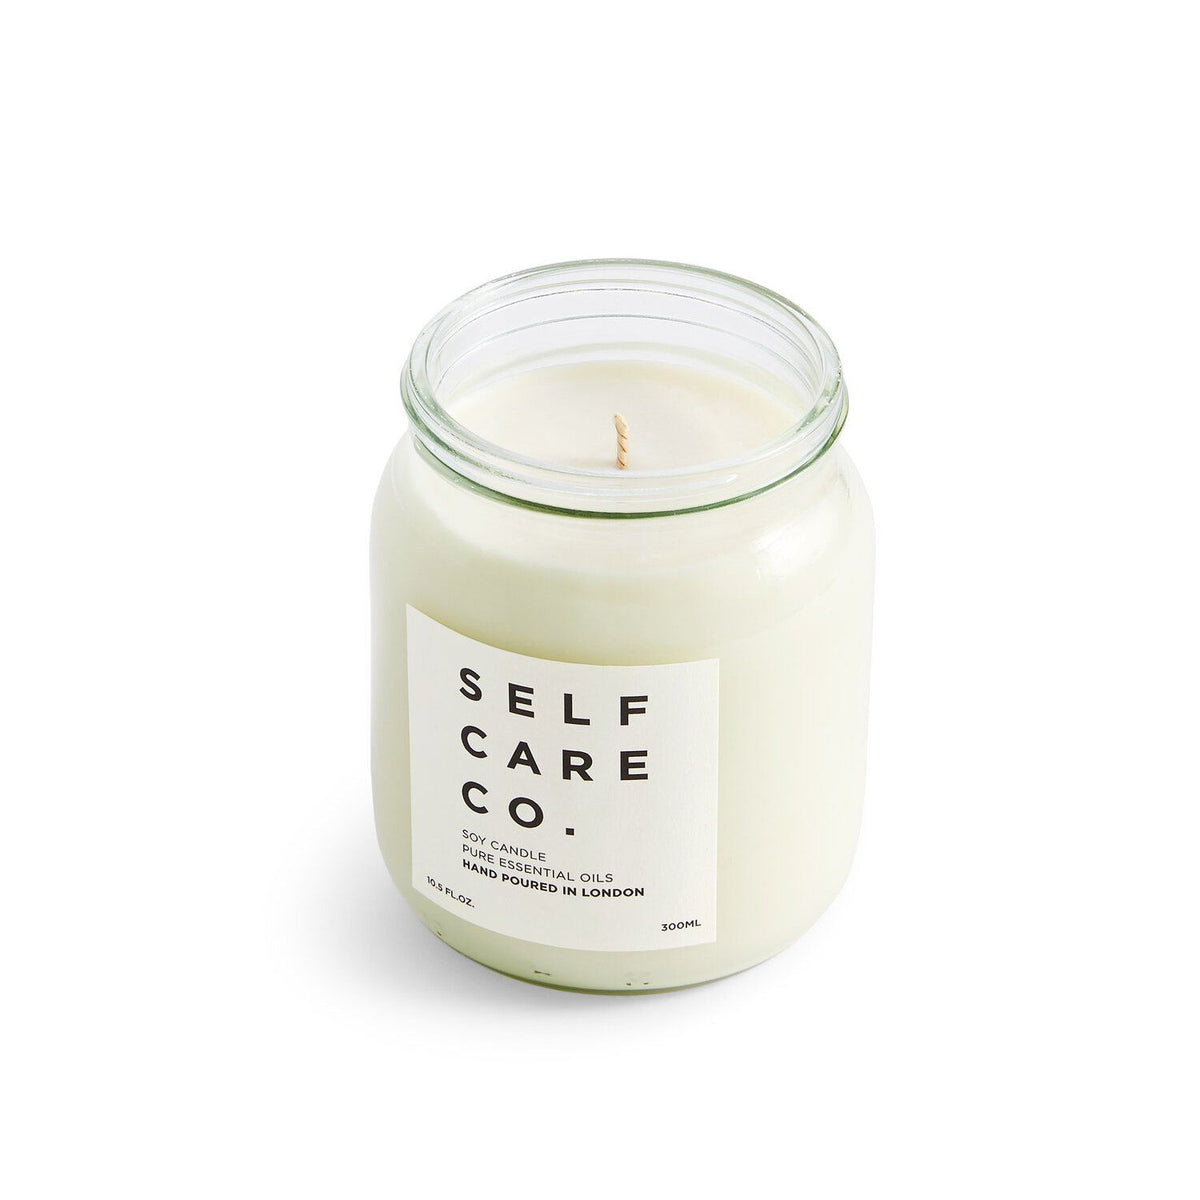 May Chang + Rosemary Aromatherapy Candle Kerzen Self Care Co. - Genuine Selection